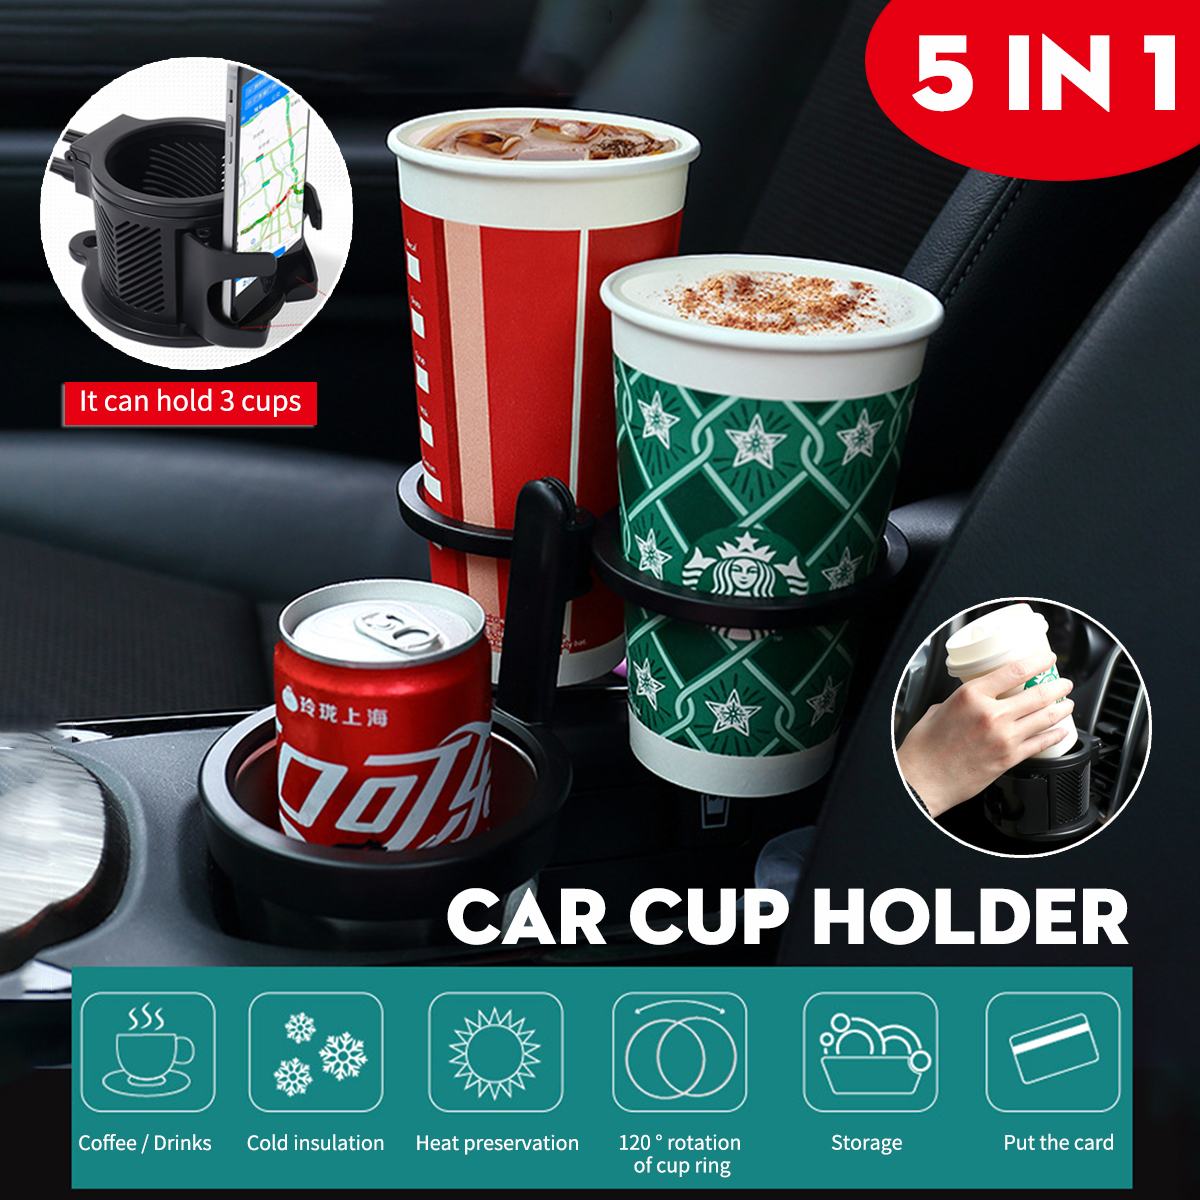 5-IN-1-Multifunctional-Split-Design-Car-Stainless-Steel-Water-Cup-Holder-with-Mobile-Phone-Bracket-S-1875639-1